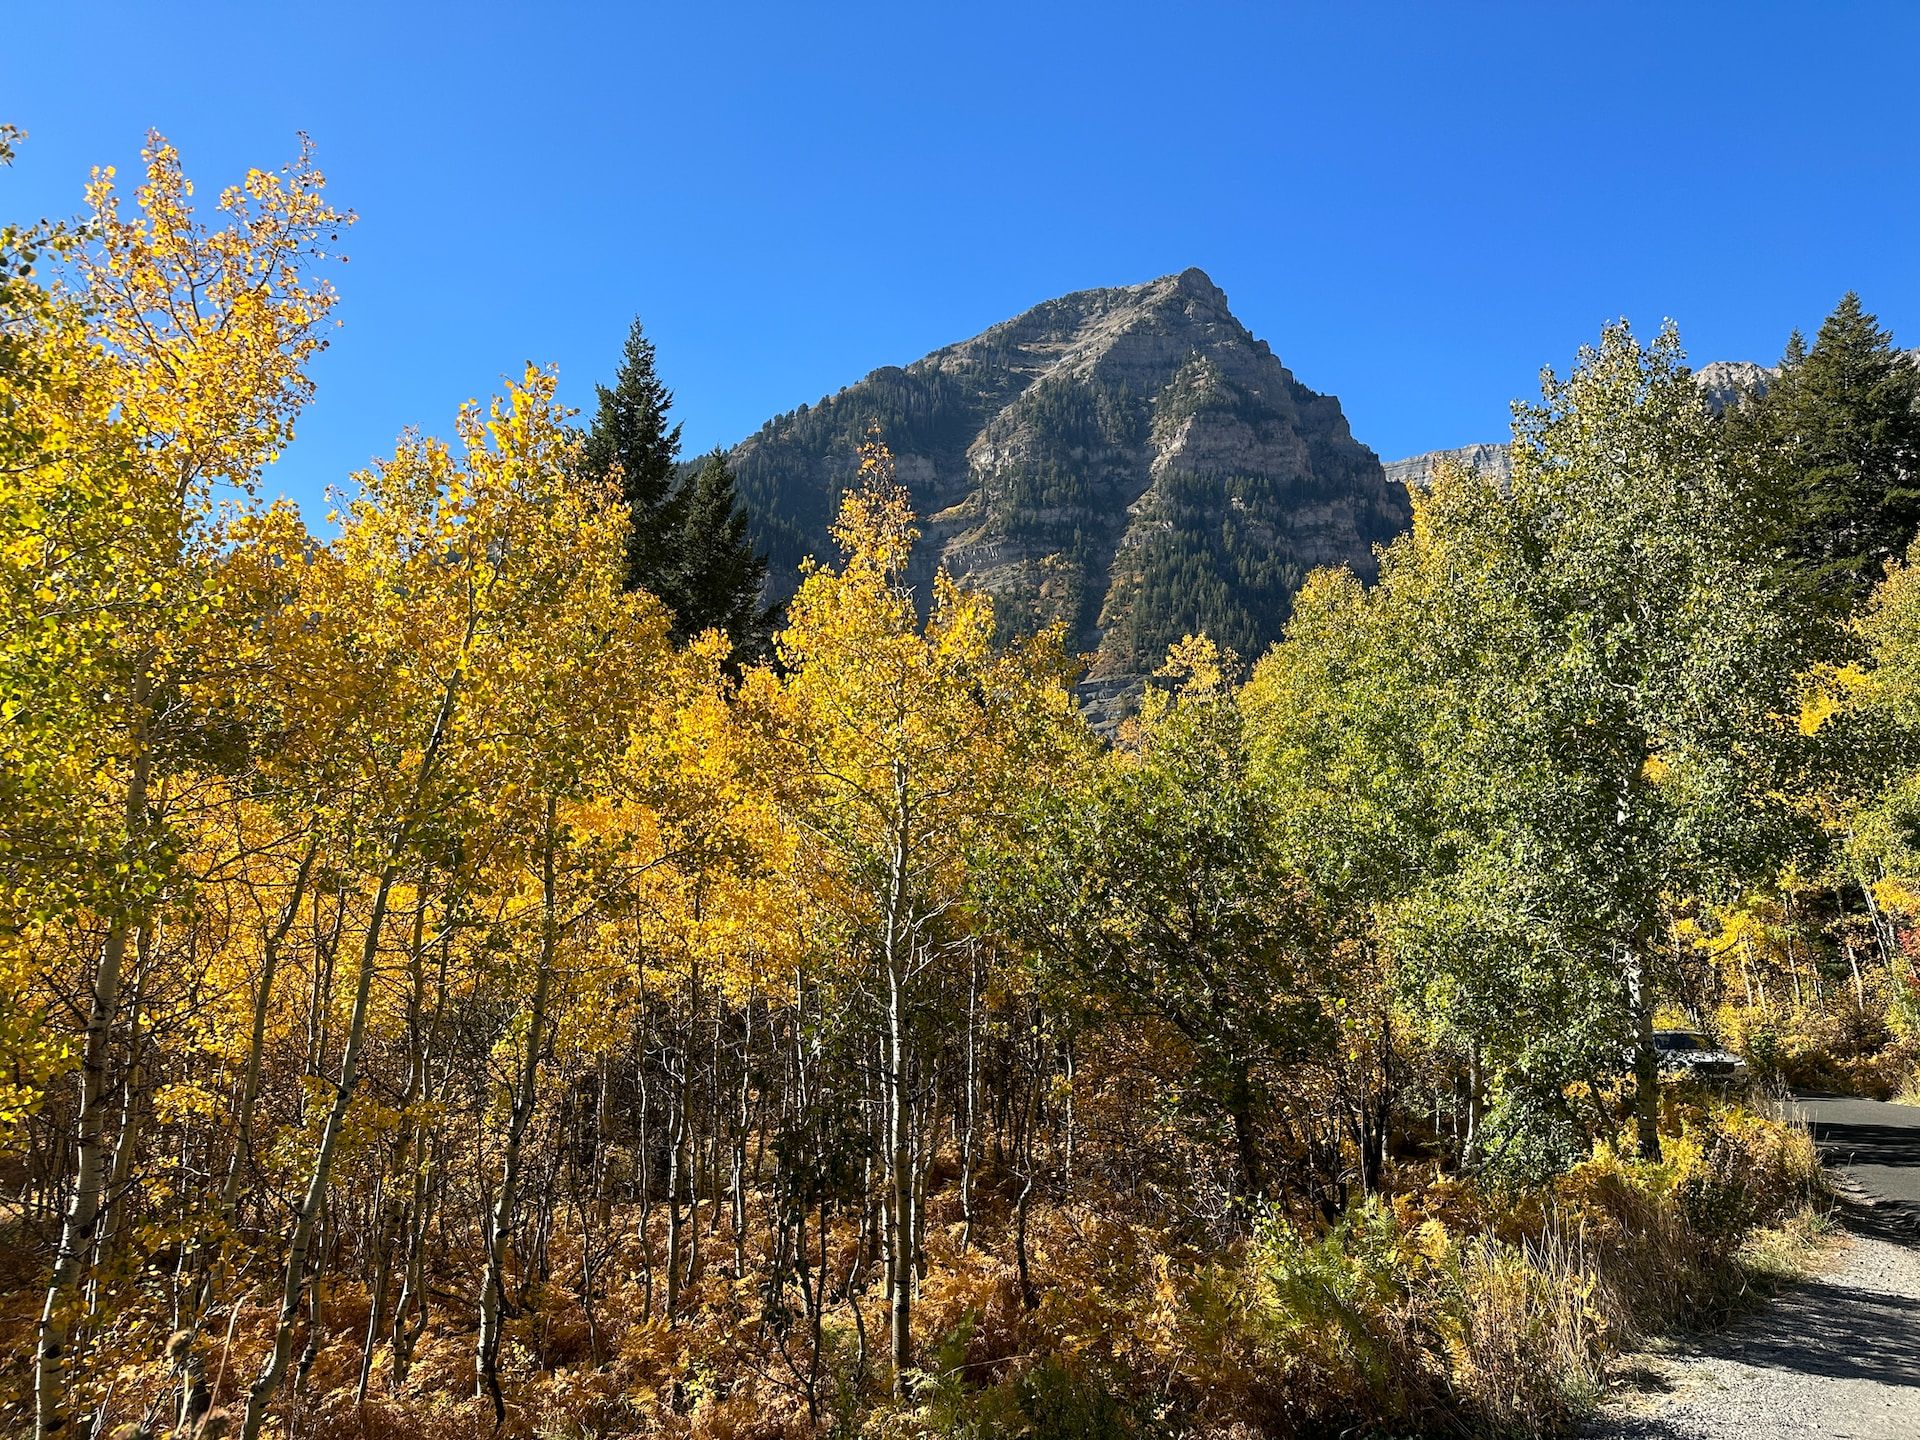 Aspen Trees turning color in the Uinta-Wasatch-Cache National Forest, Utah